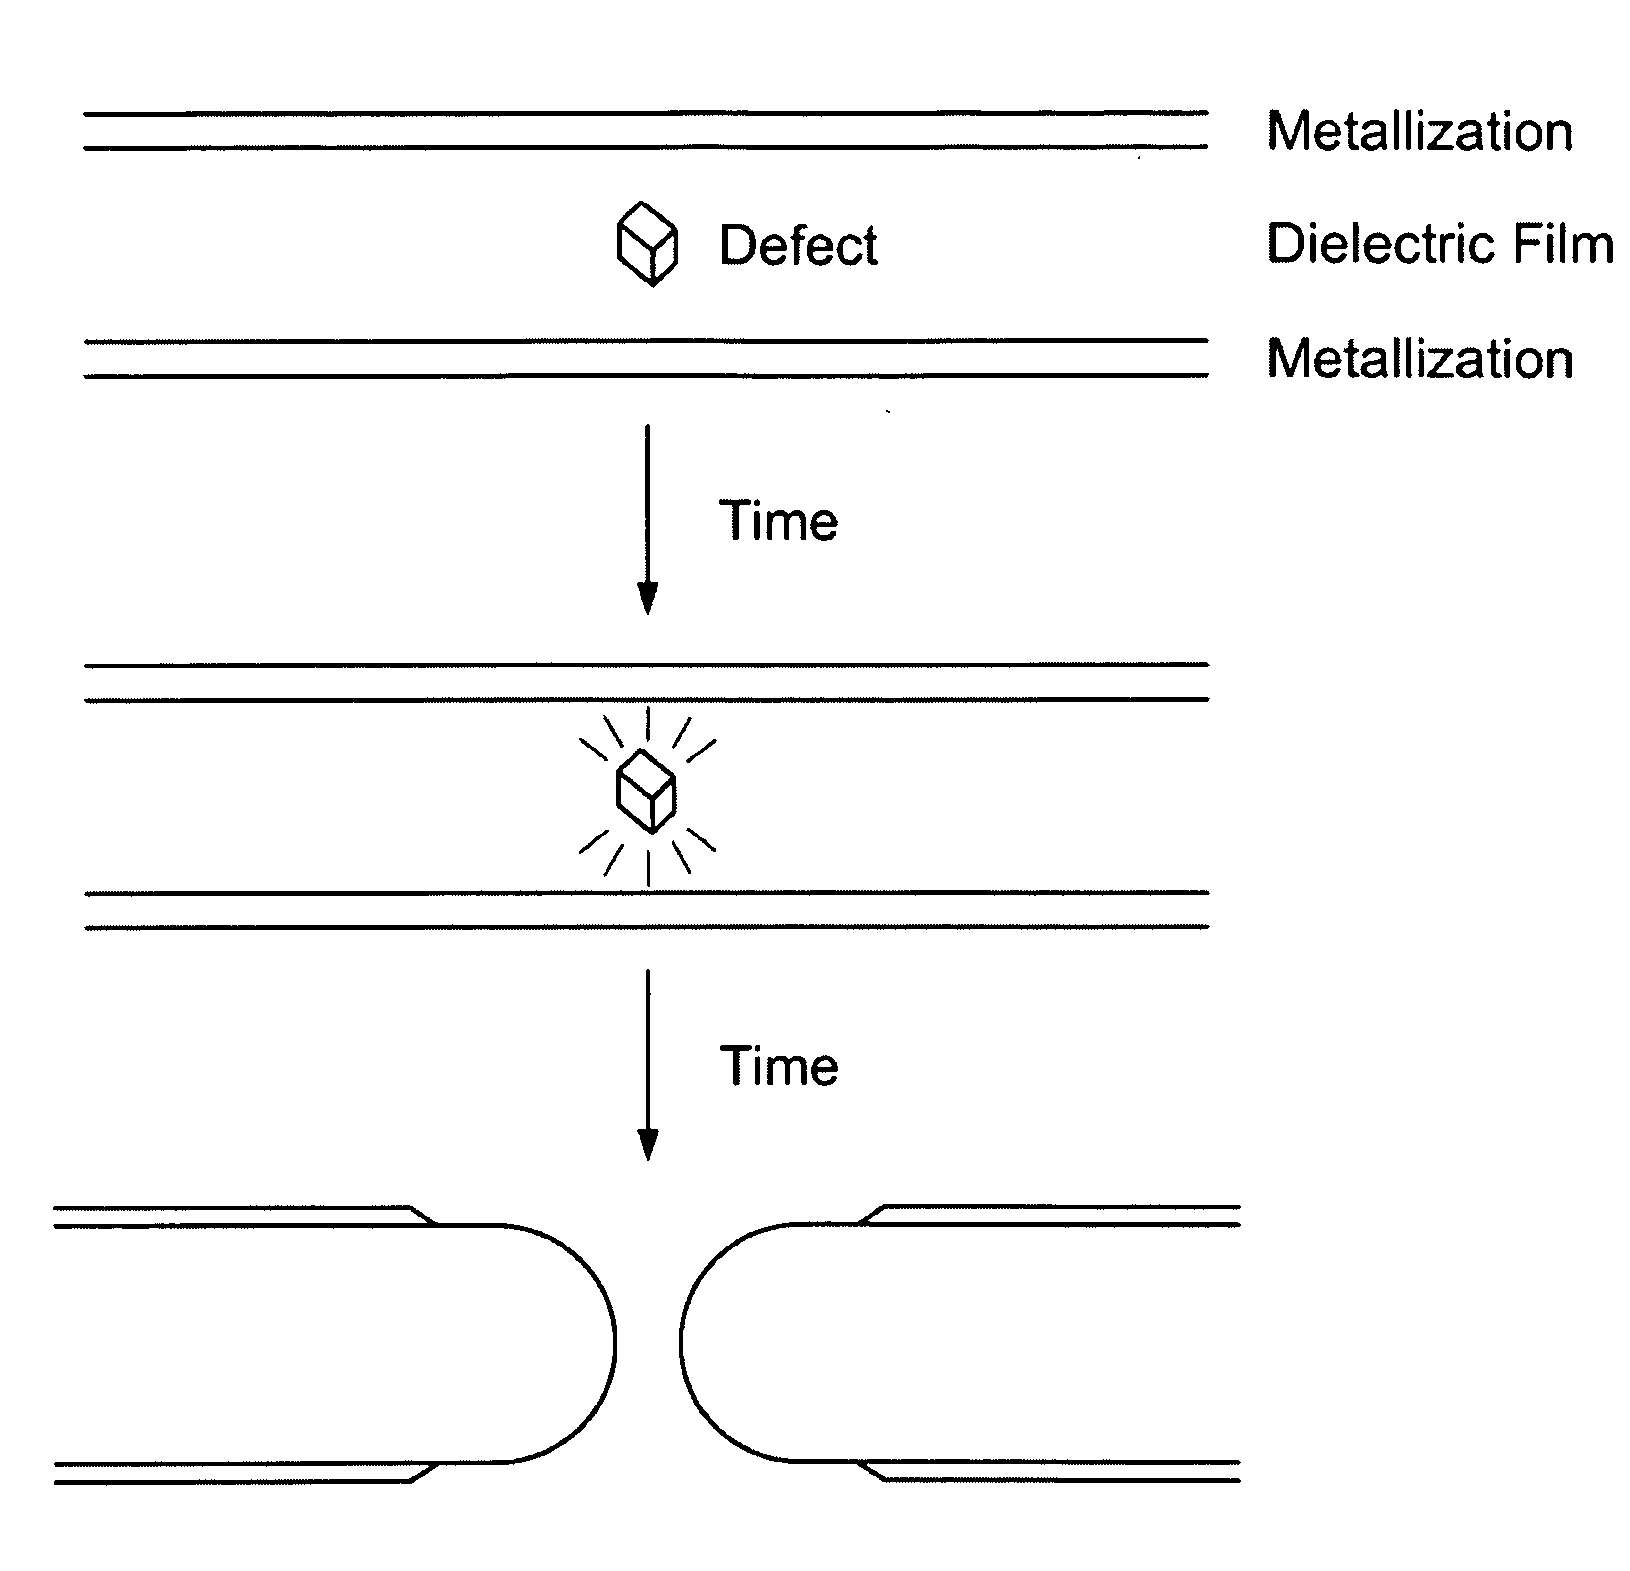 Fault-tolerant materials and methods of fabricating the same